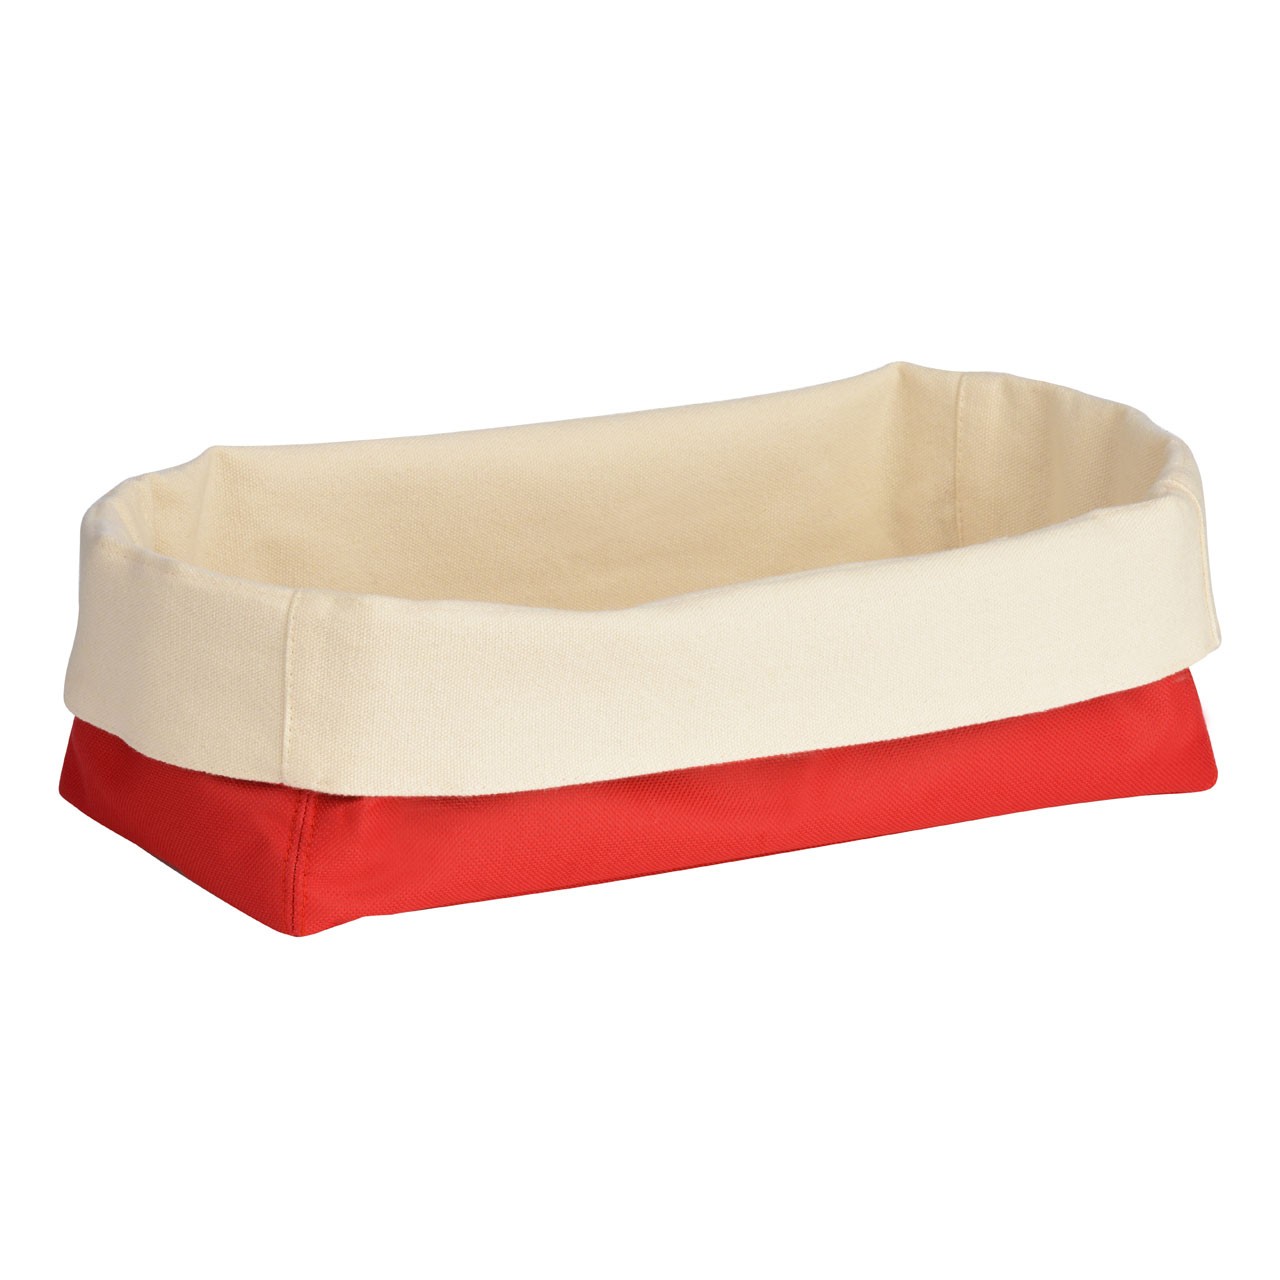 New Kitchen Bread Basket Red And Cream Folded Design Polyester A